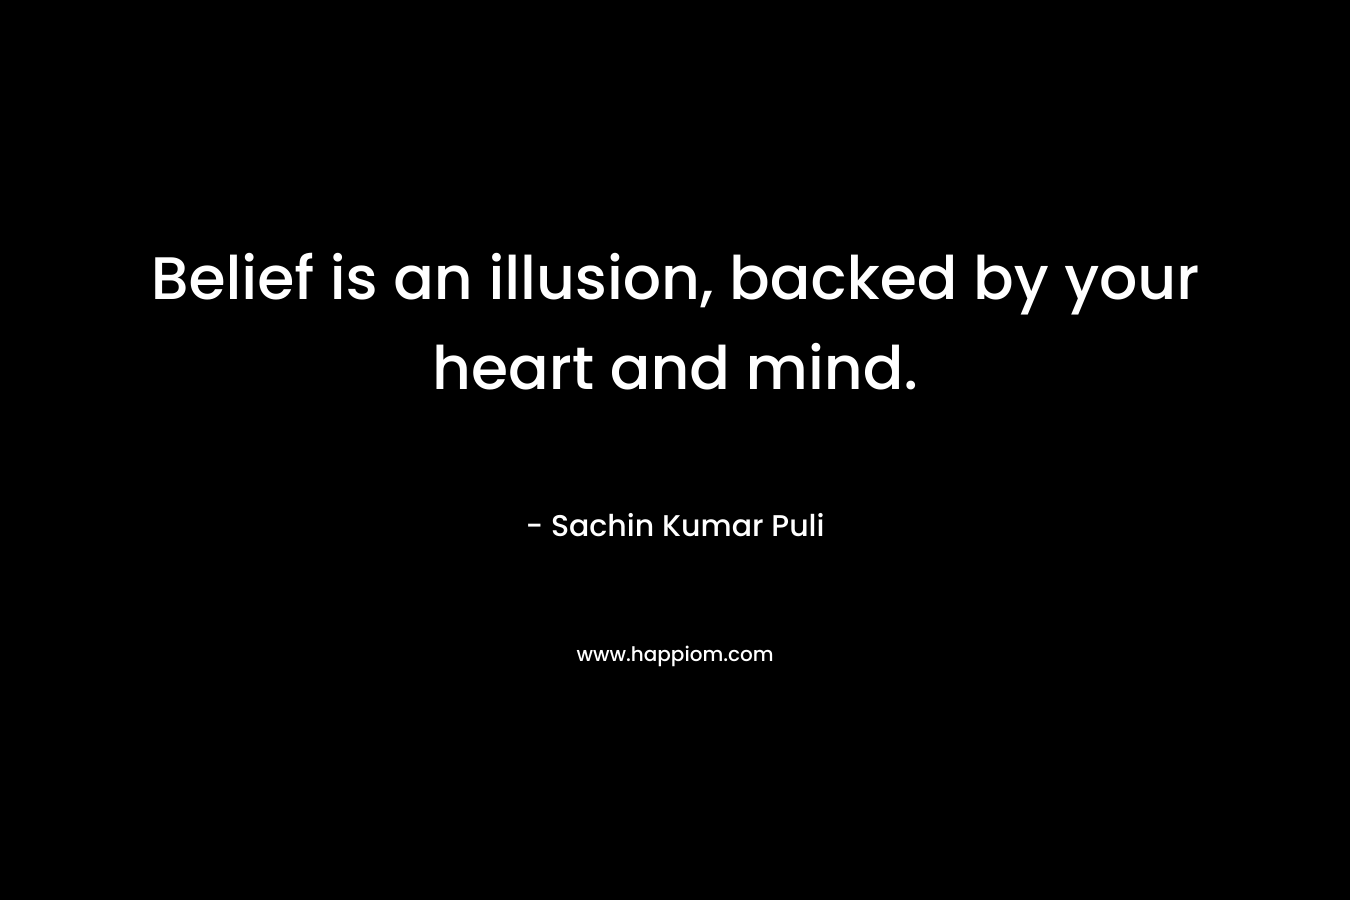 Belief is an illusion, backed by your heart and mind. – Sachin Kumar Puli